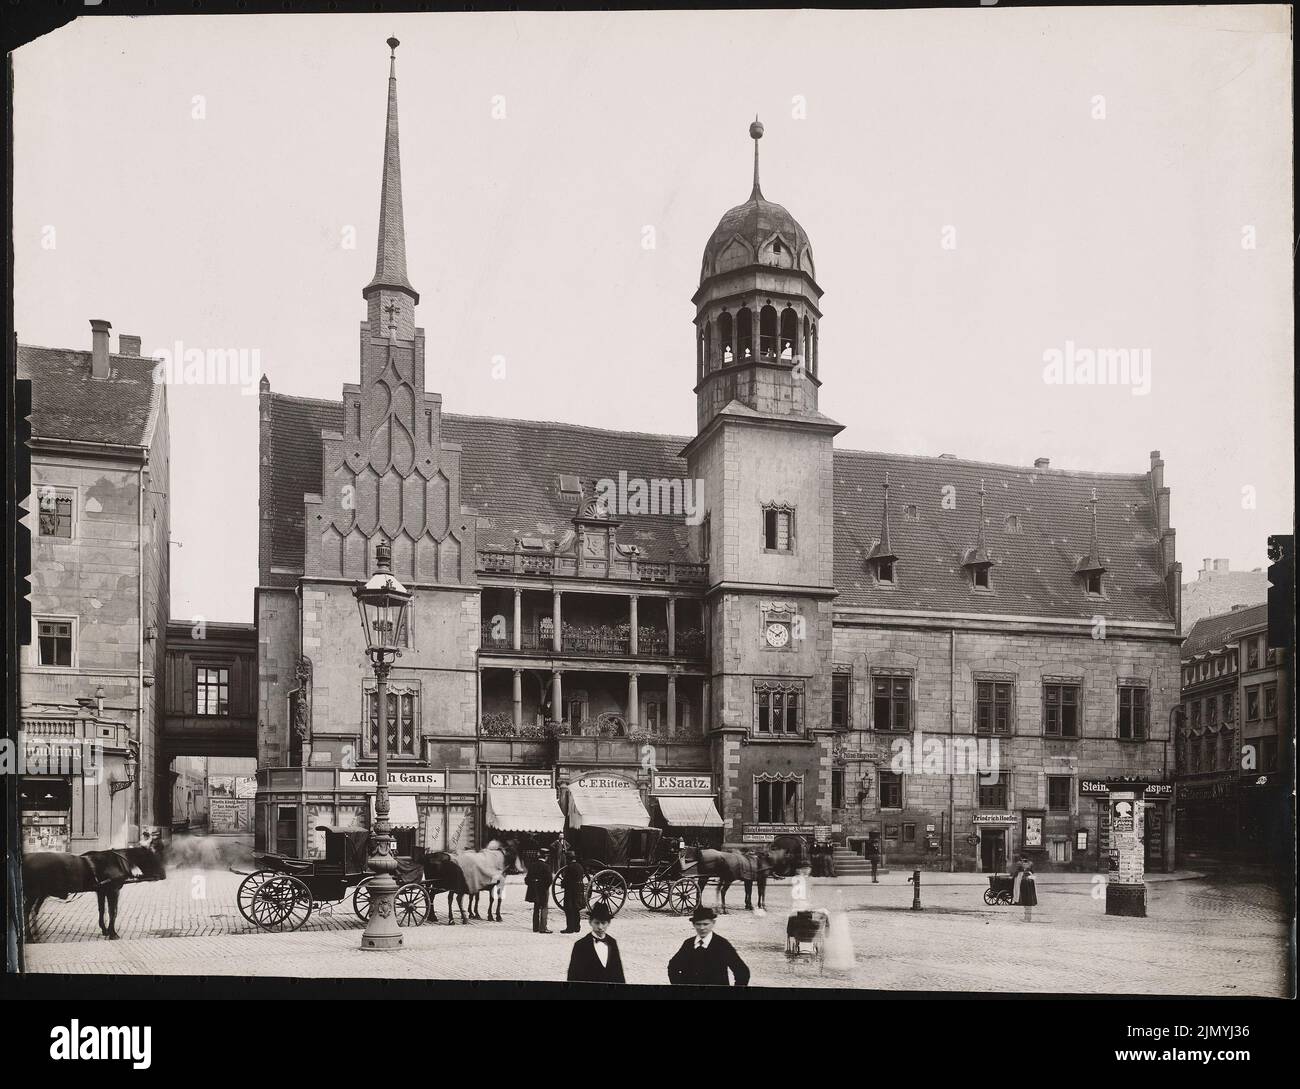 Royal Prussian measuring picture, town hall, Halle/Saale (without dat.): View of the one, originally built in the 14th century, completed in 1558-68 by Nickel Hoffmann in Renaissance. Photo, 30.8 x 40.1 cm (including scan edges) Stock Photo